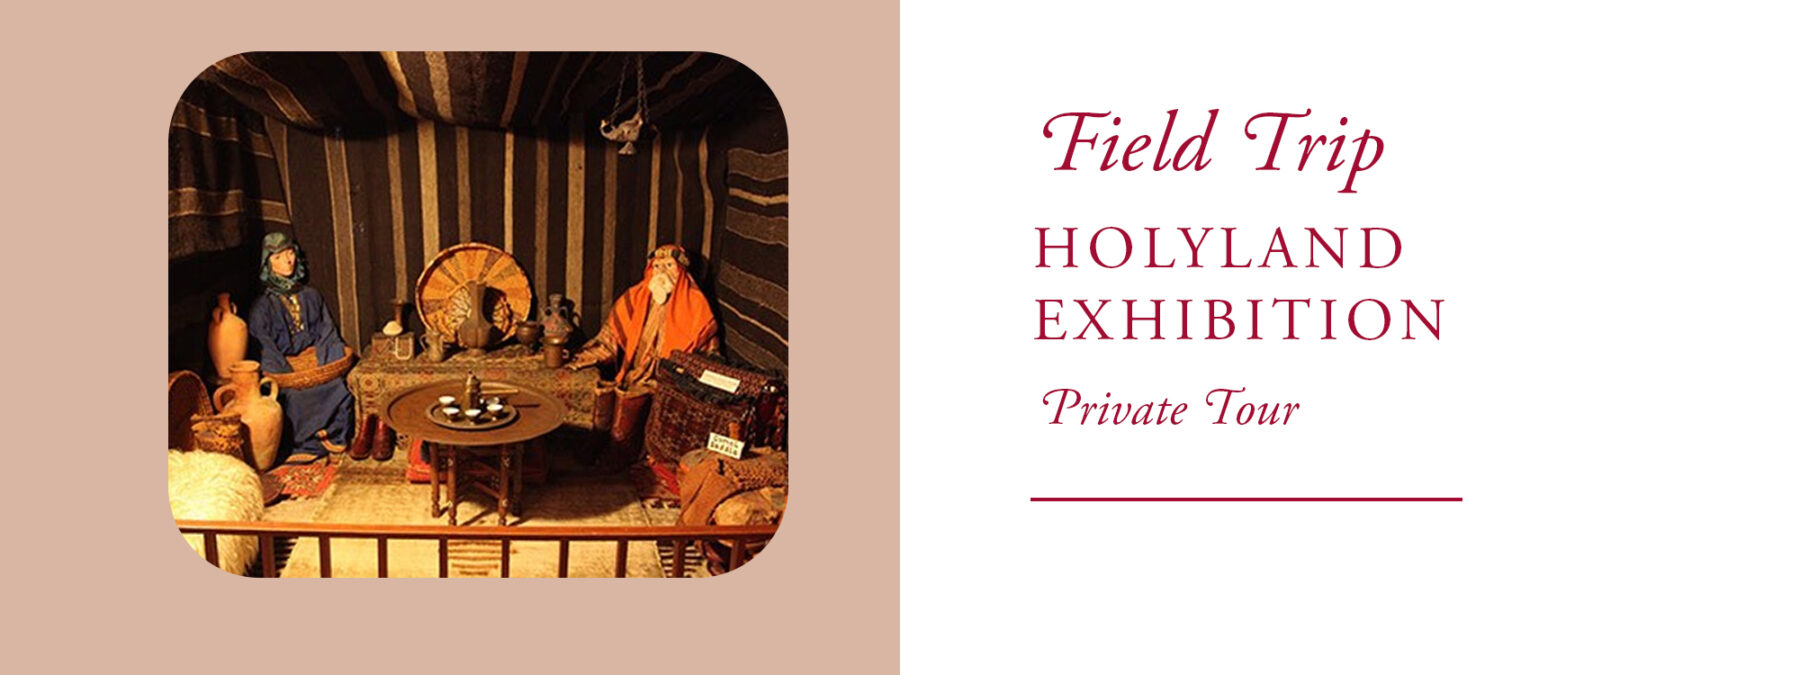 Field Trip: Holyland Exhibition Private Tour